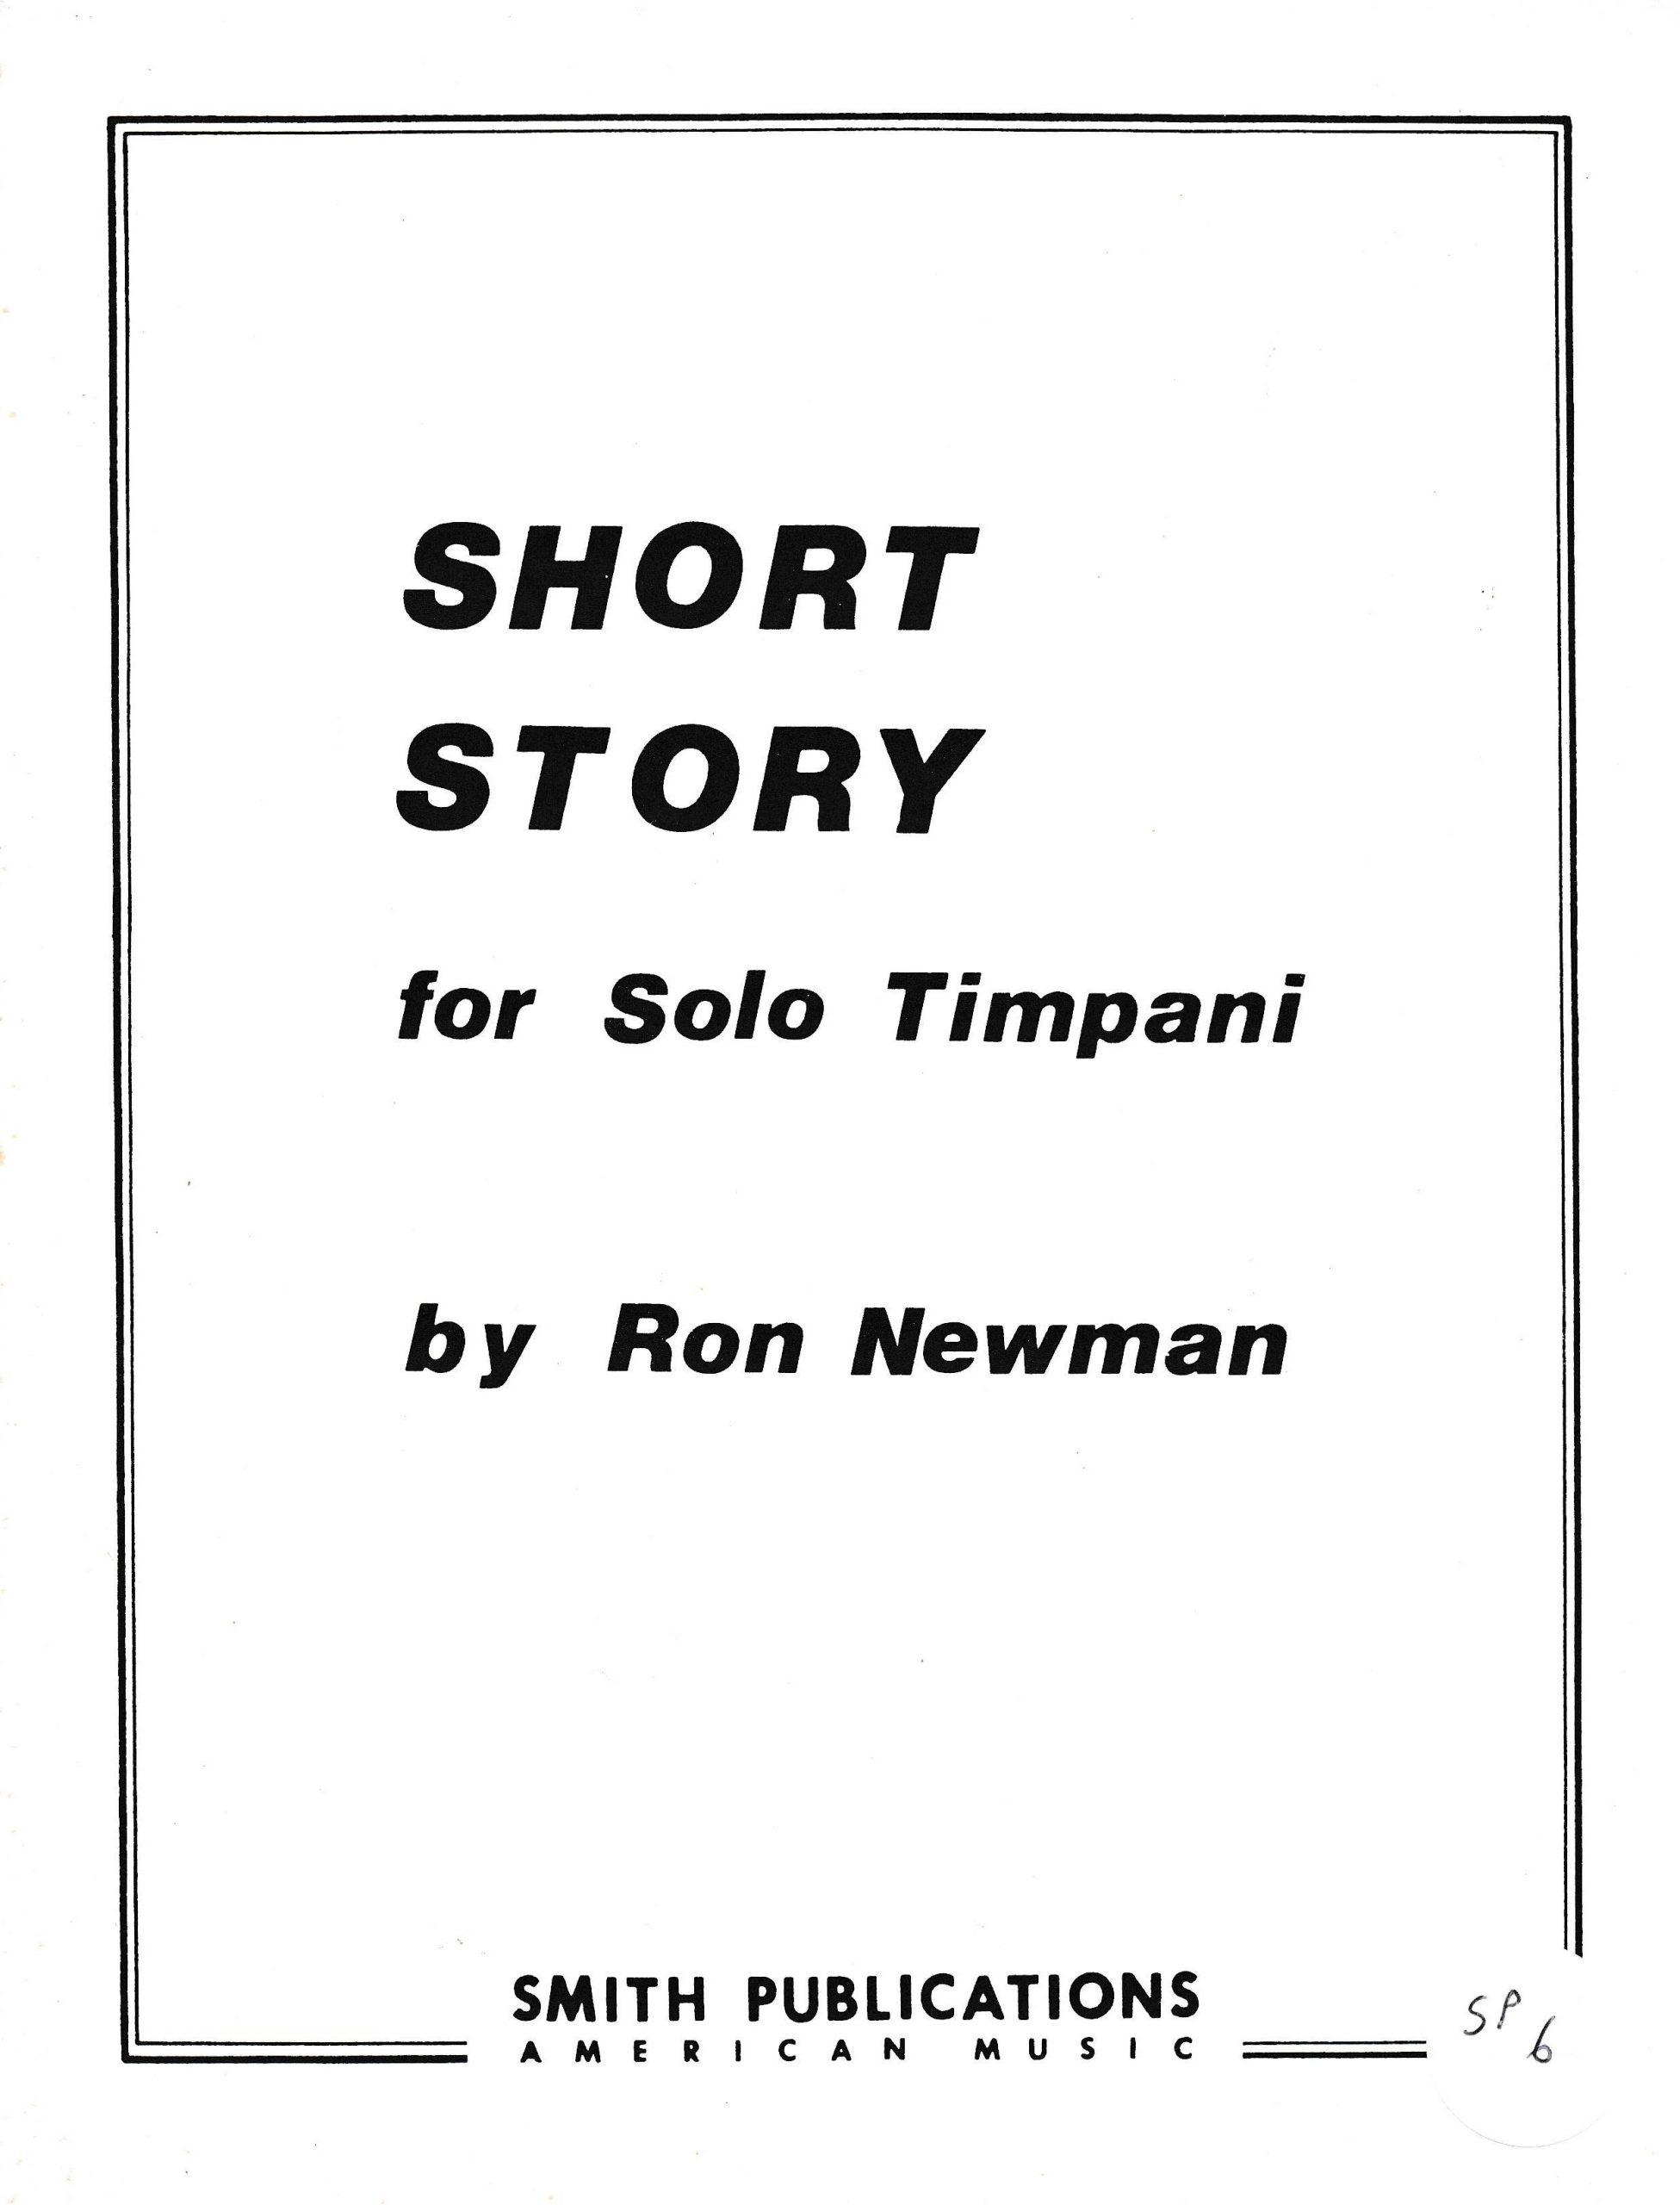 Short Story by Ron Newman